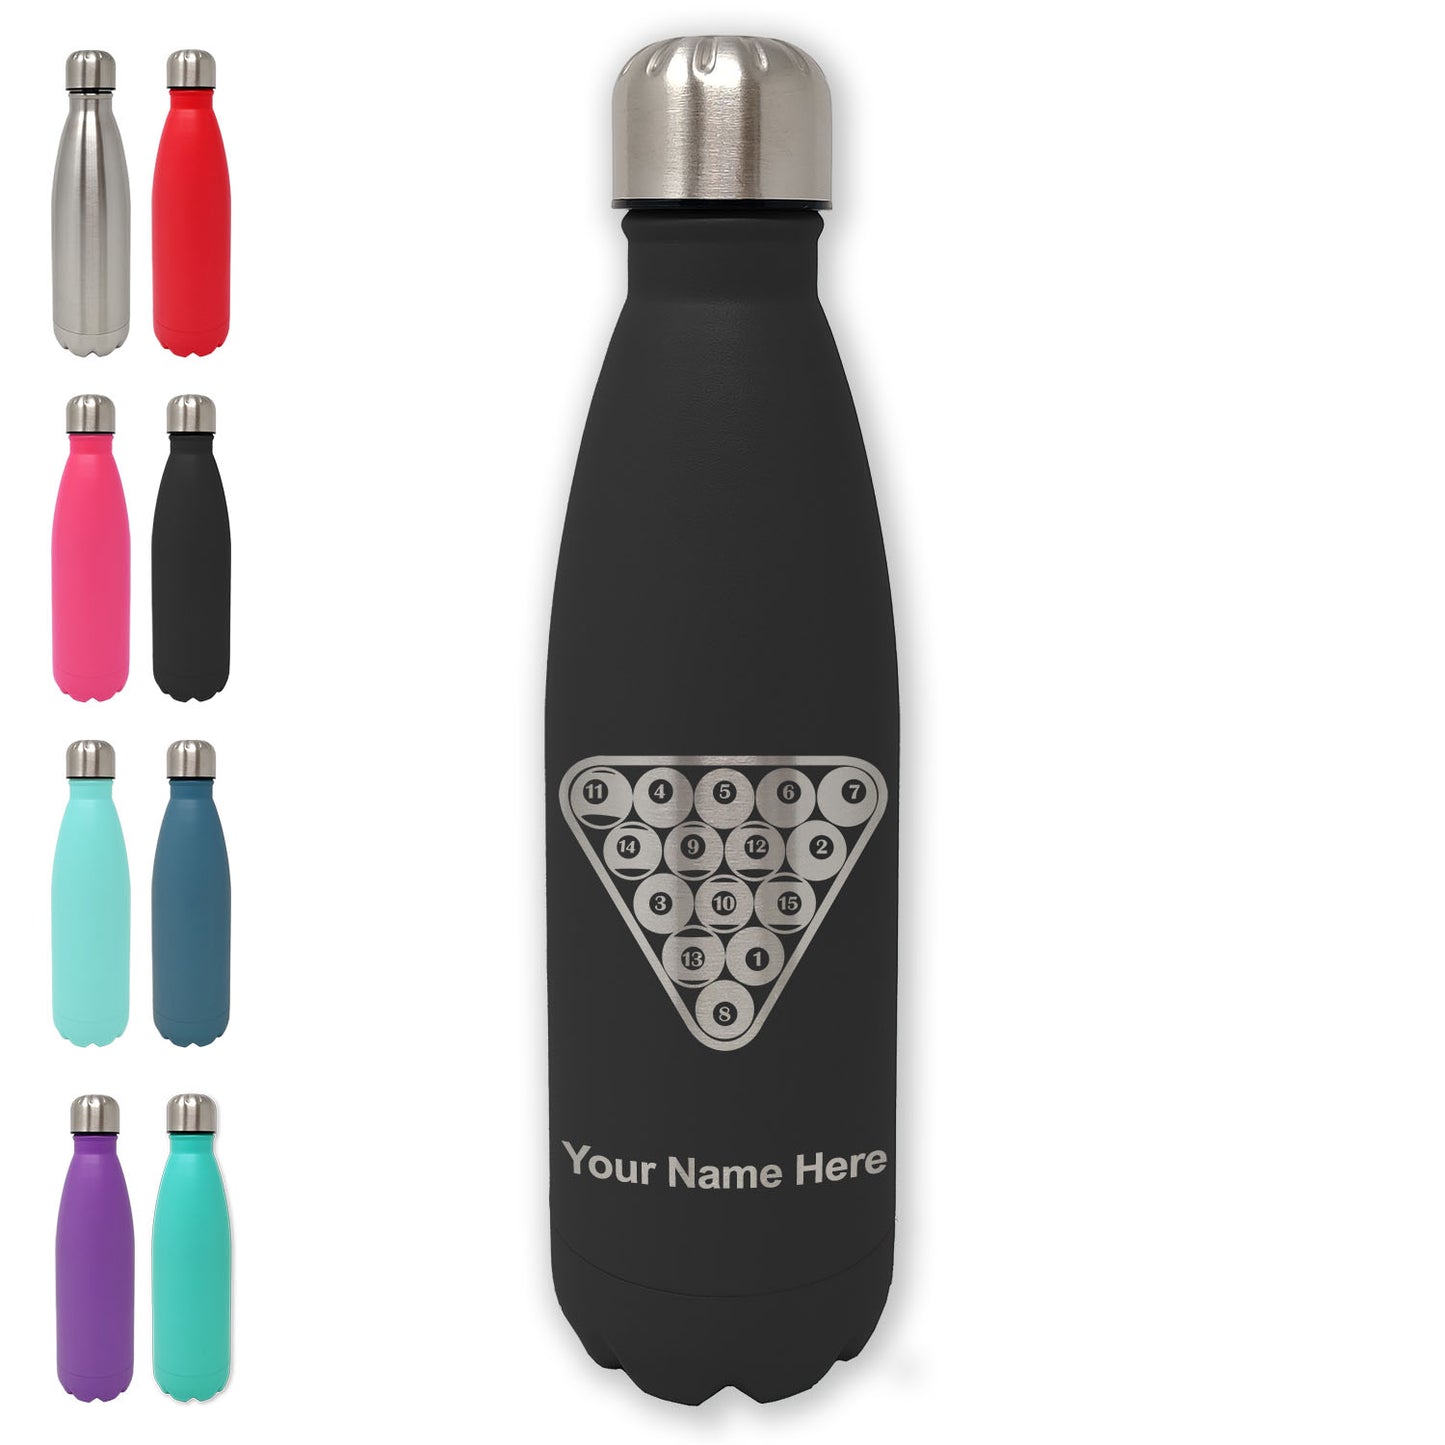 LaserGram Double Wall Water Bottle, Billiard Balls, Personalized Engraving Included